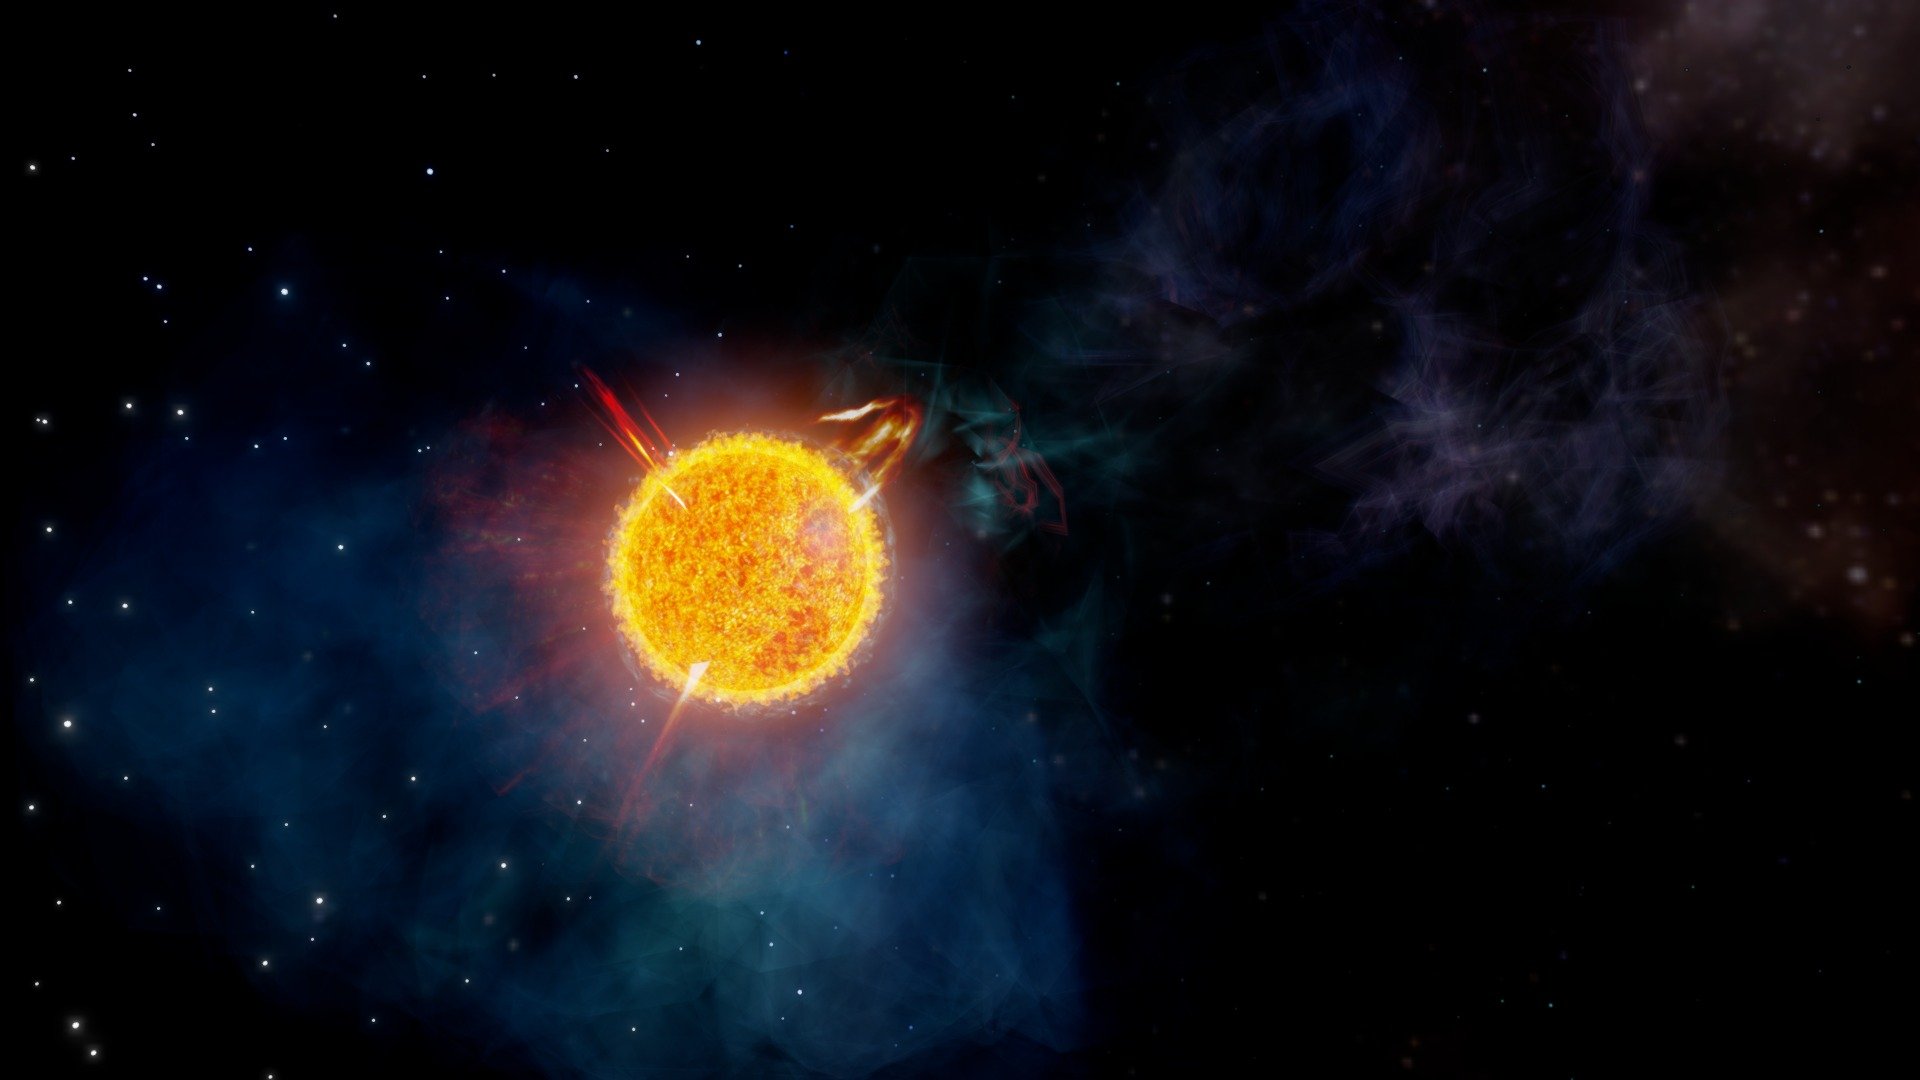 Betelgeuse is a red supergiant that shines in one of the &ldquo;shoulders